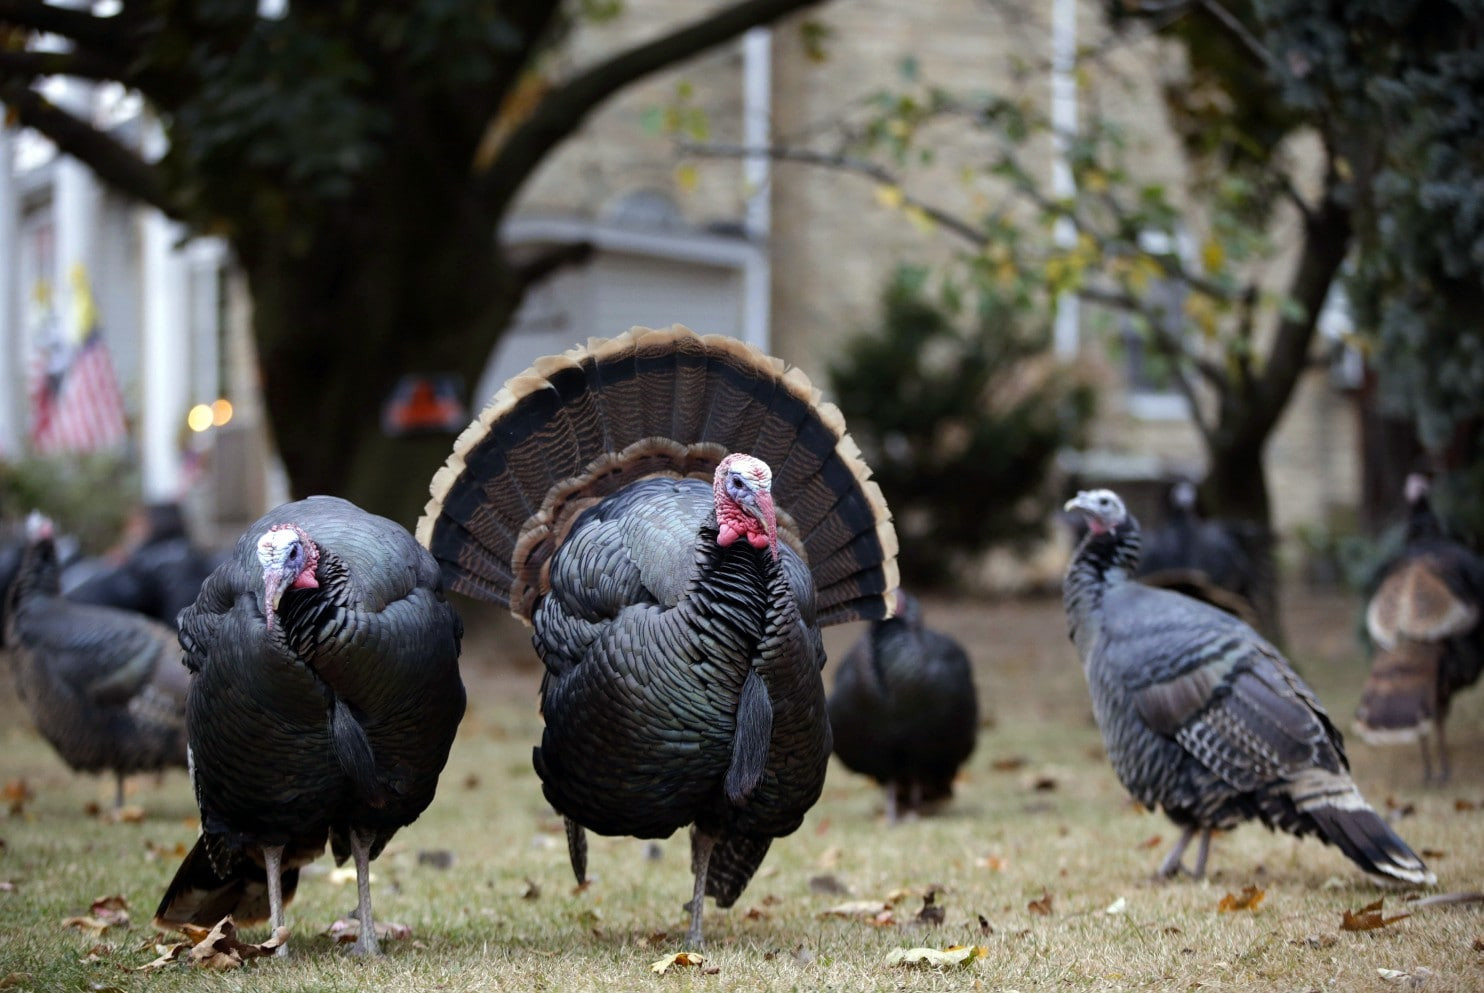 Thanksgiving Pictures Turkey
 Are turkeys really the dumbest animals The Washington Post